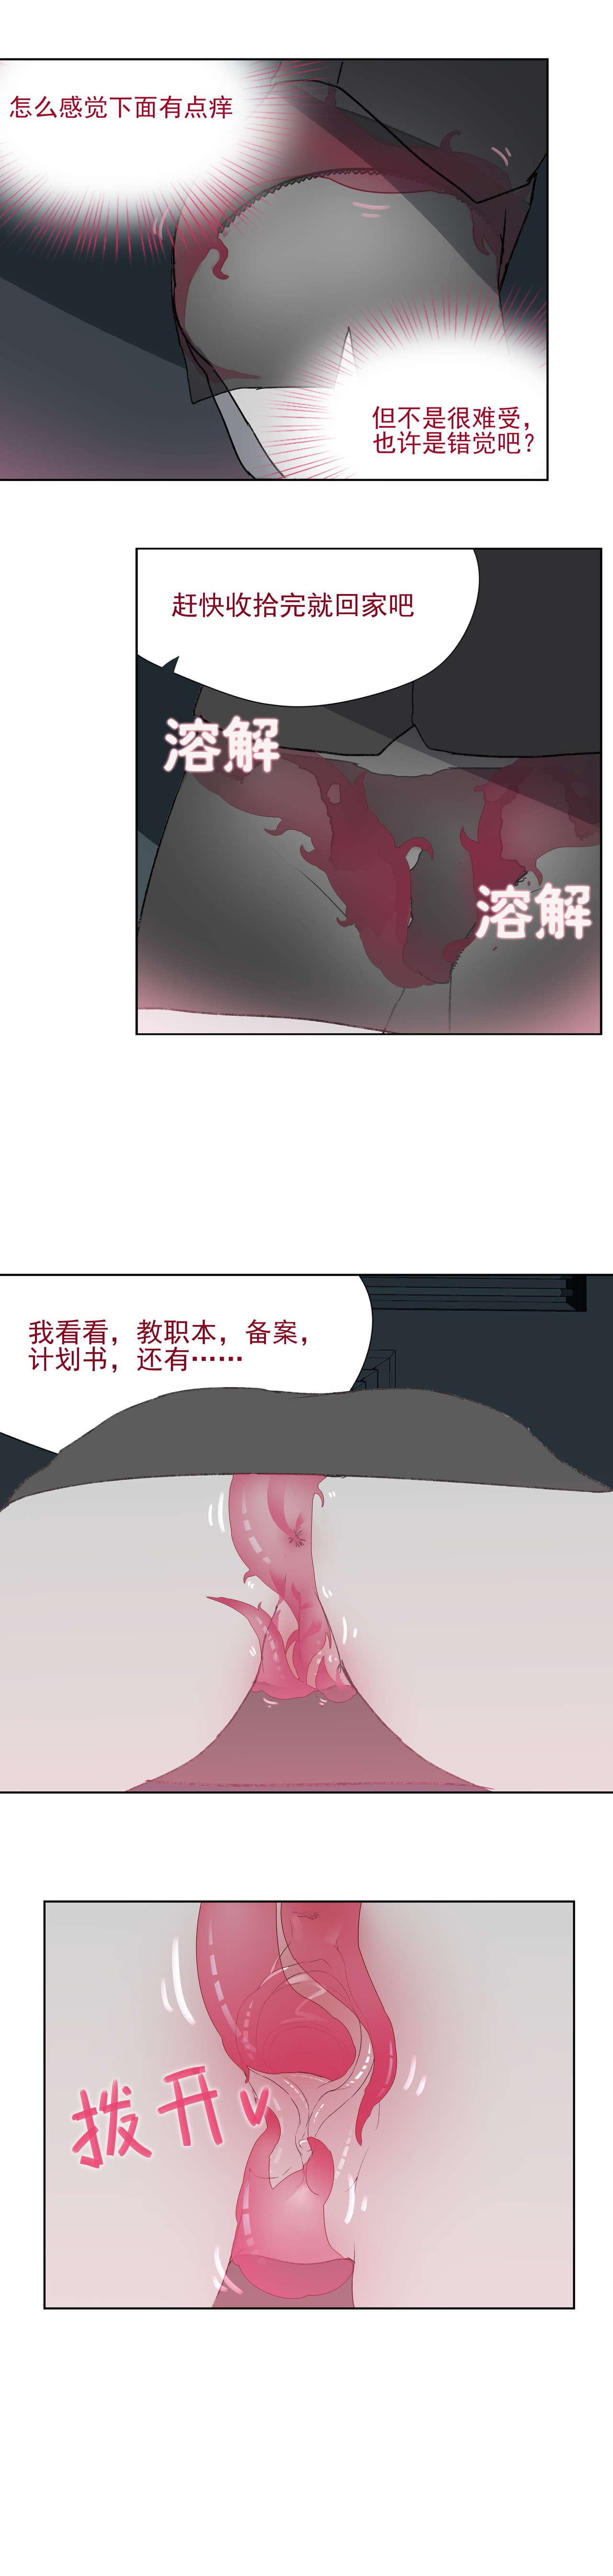 [7T-黑夜的光] 寄生之恋 Tentacle love [Chinese] page 5 full